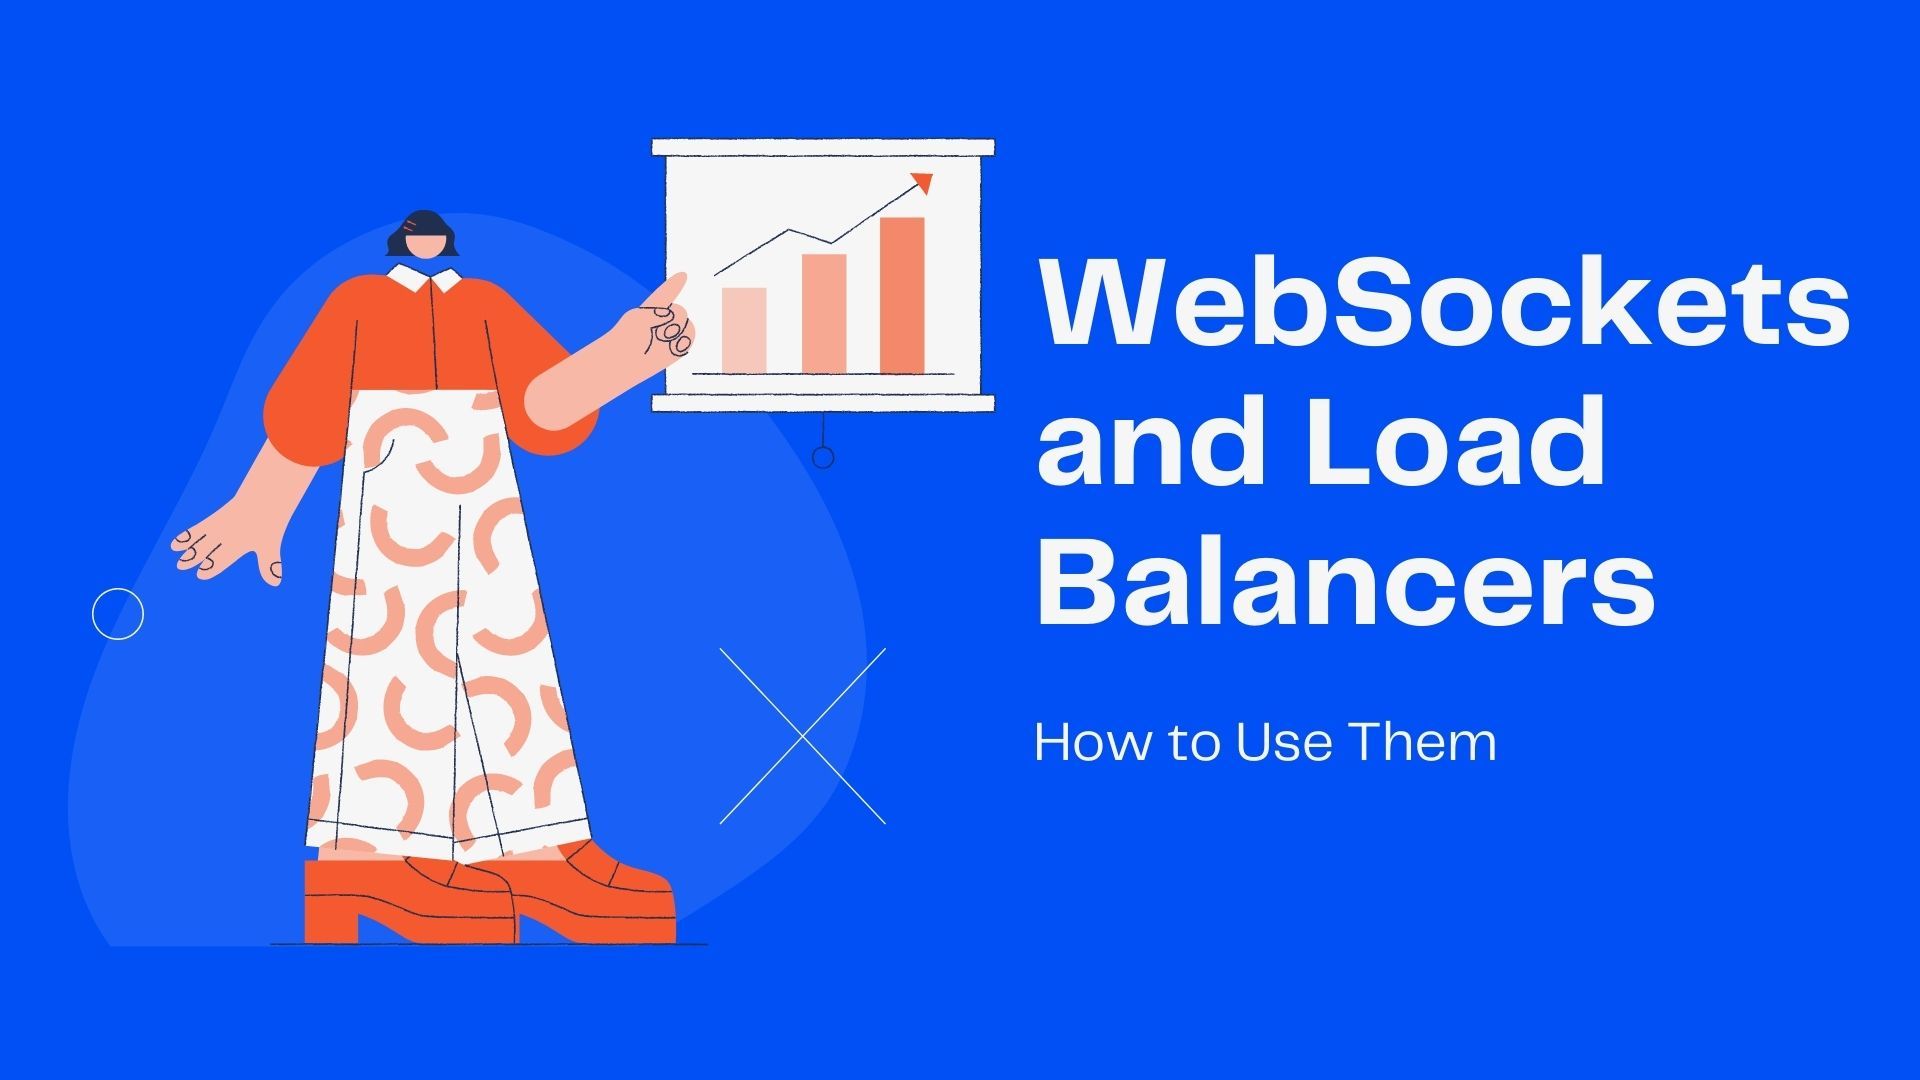 WebSockets and Load Balancers: How to Use Them